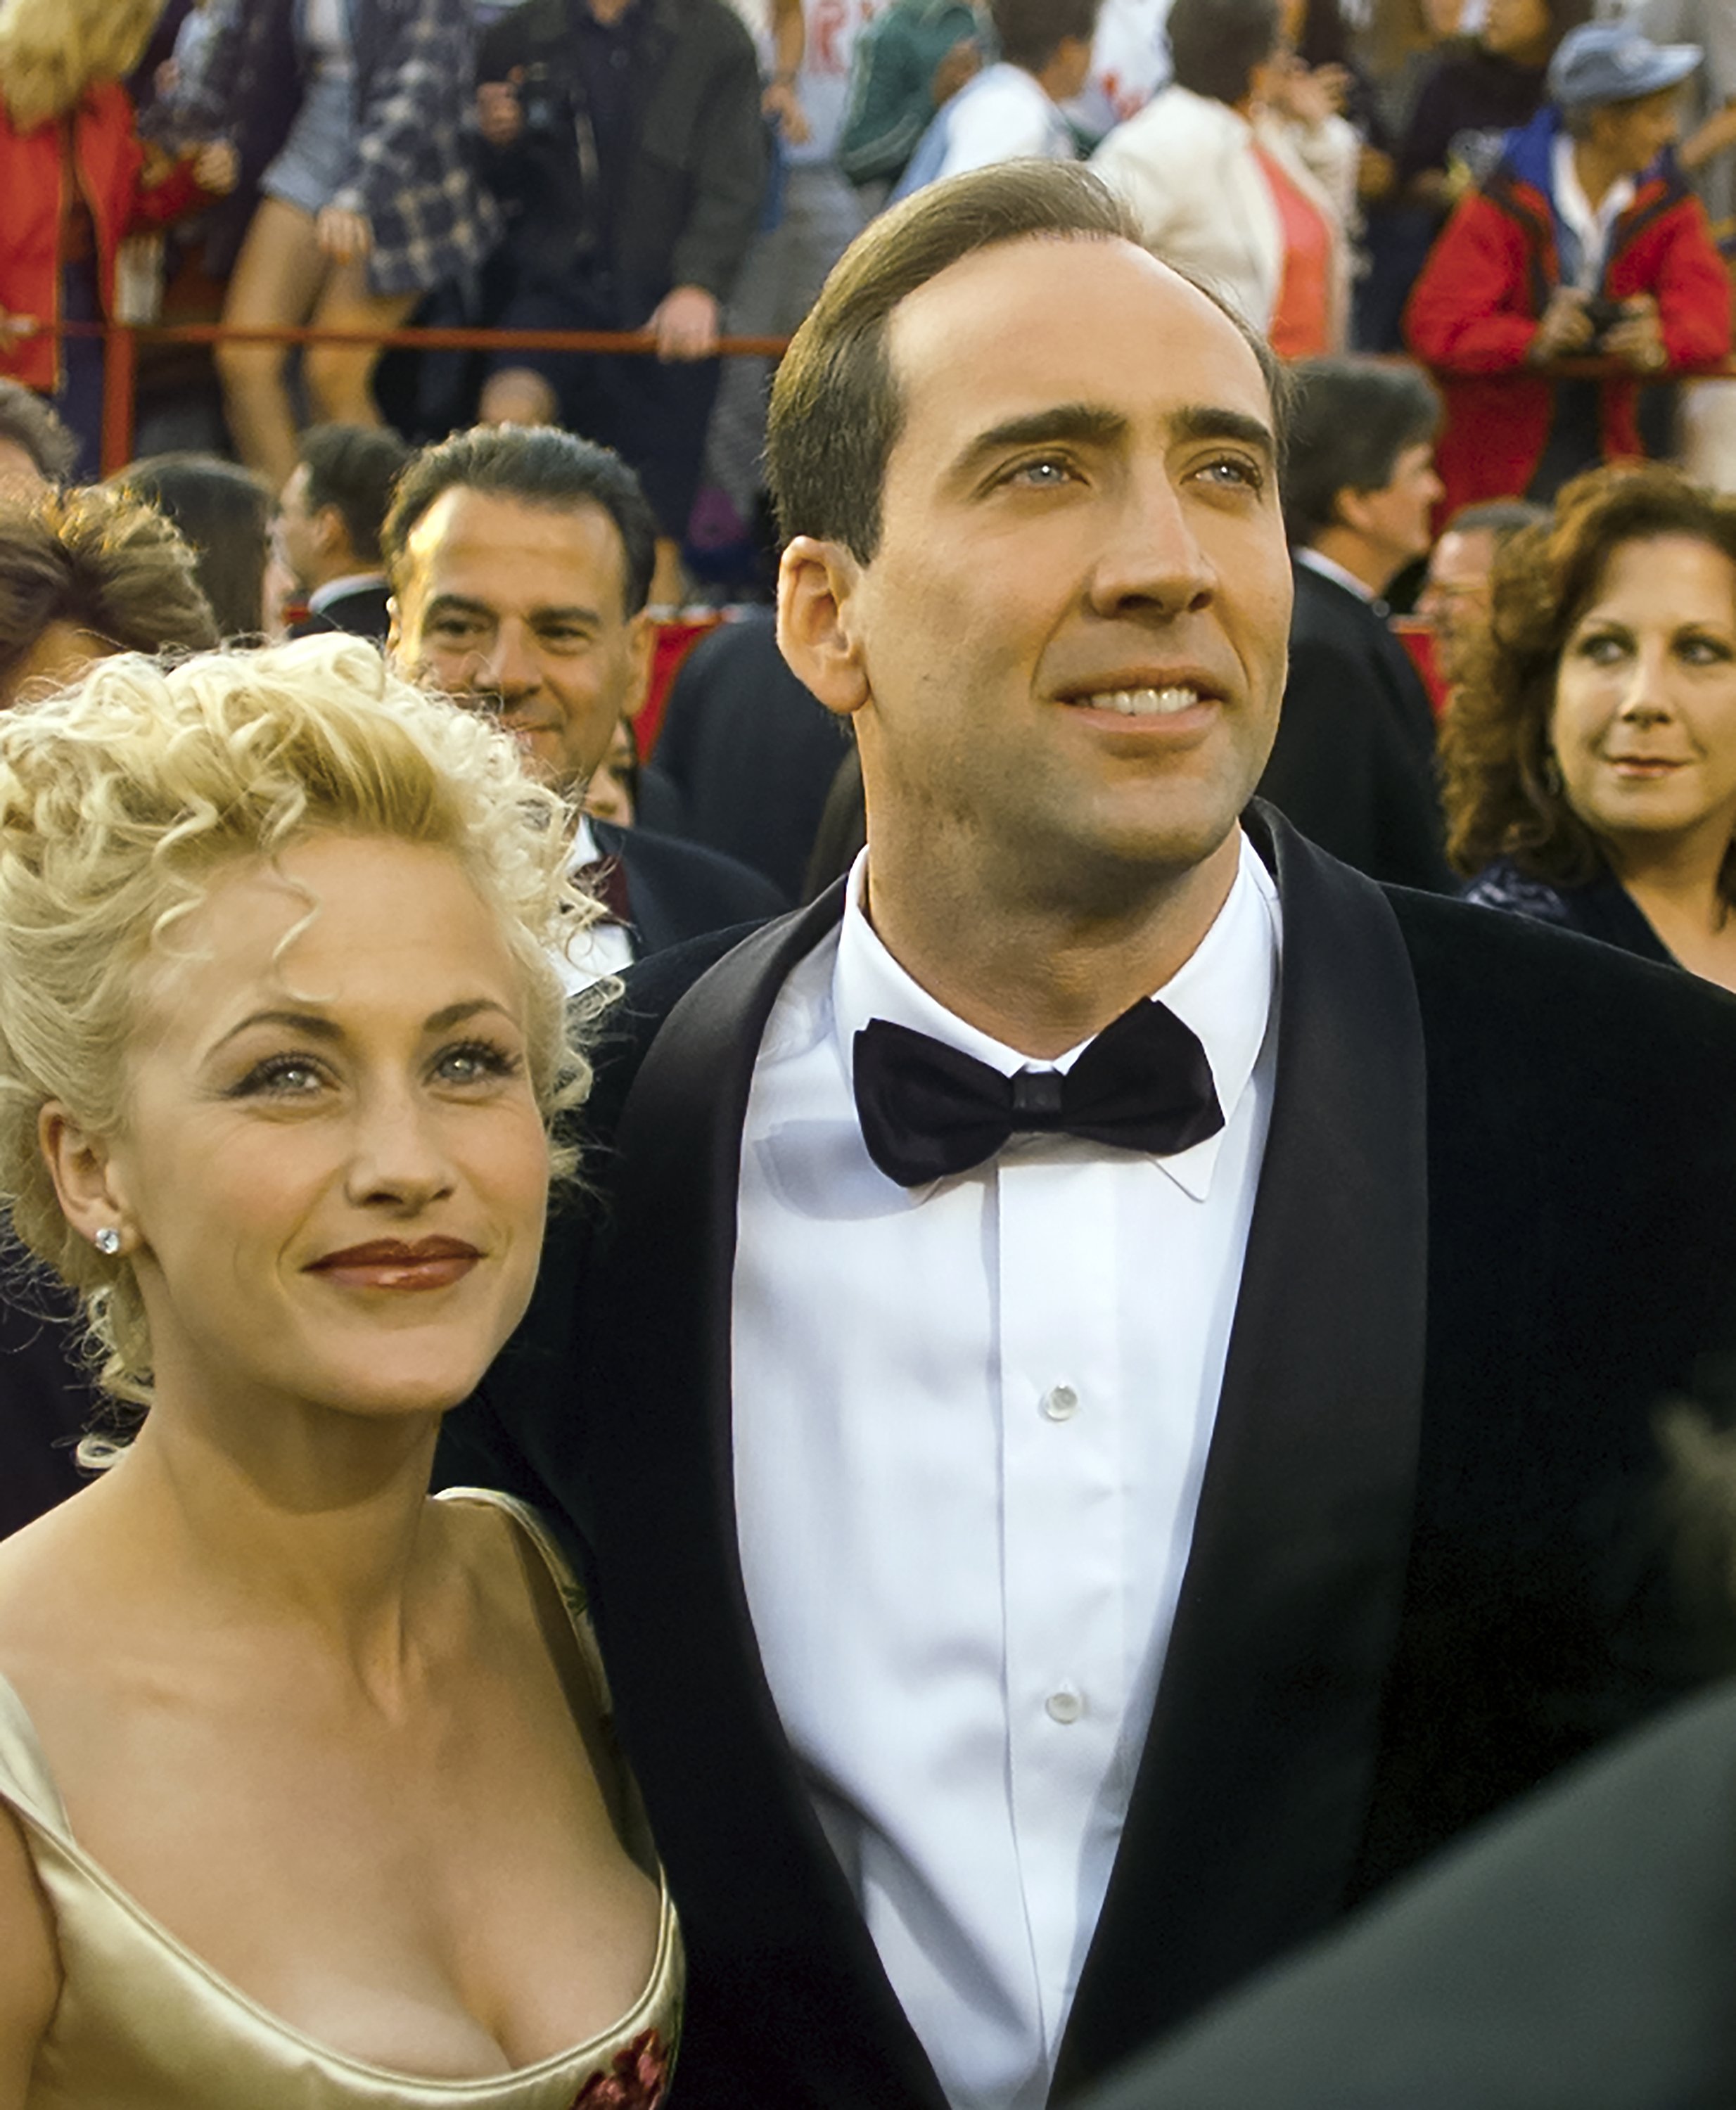 Nicolas Cage and Patricia Arquette pictured arriving to the Academy Awards on March 23, 1997 in Los Angeles, California. / Source: Getty Images